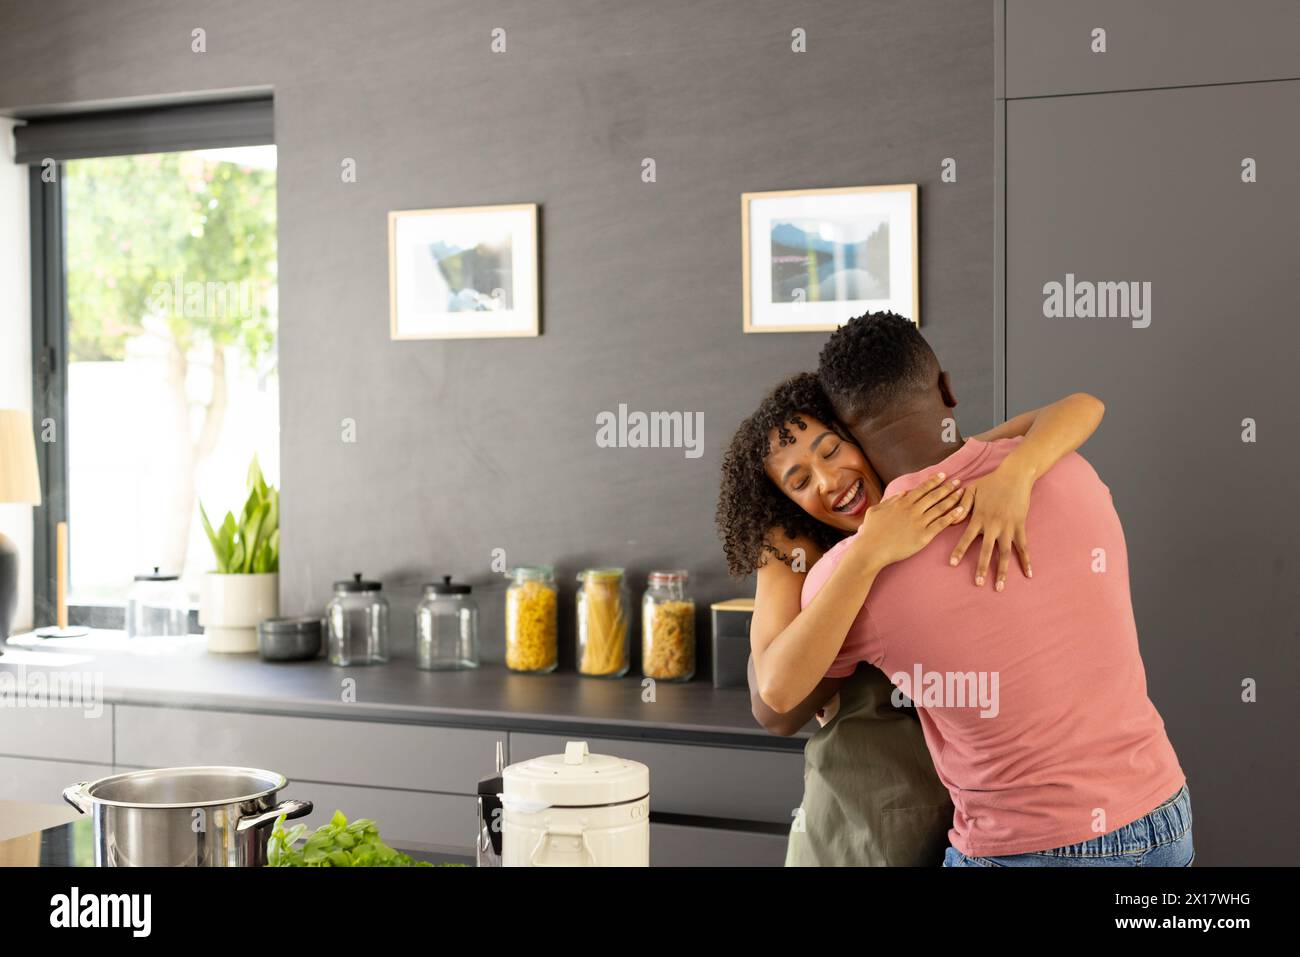 Diverse couple embracing in kitchen, near wall art with copy space Stock Photo